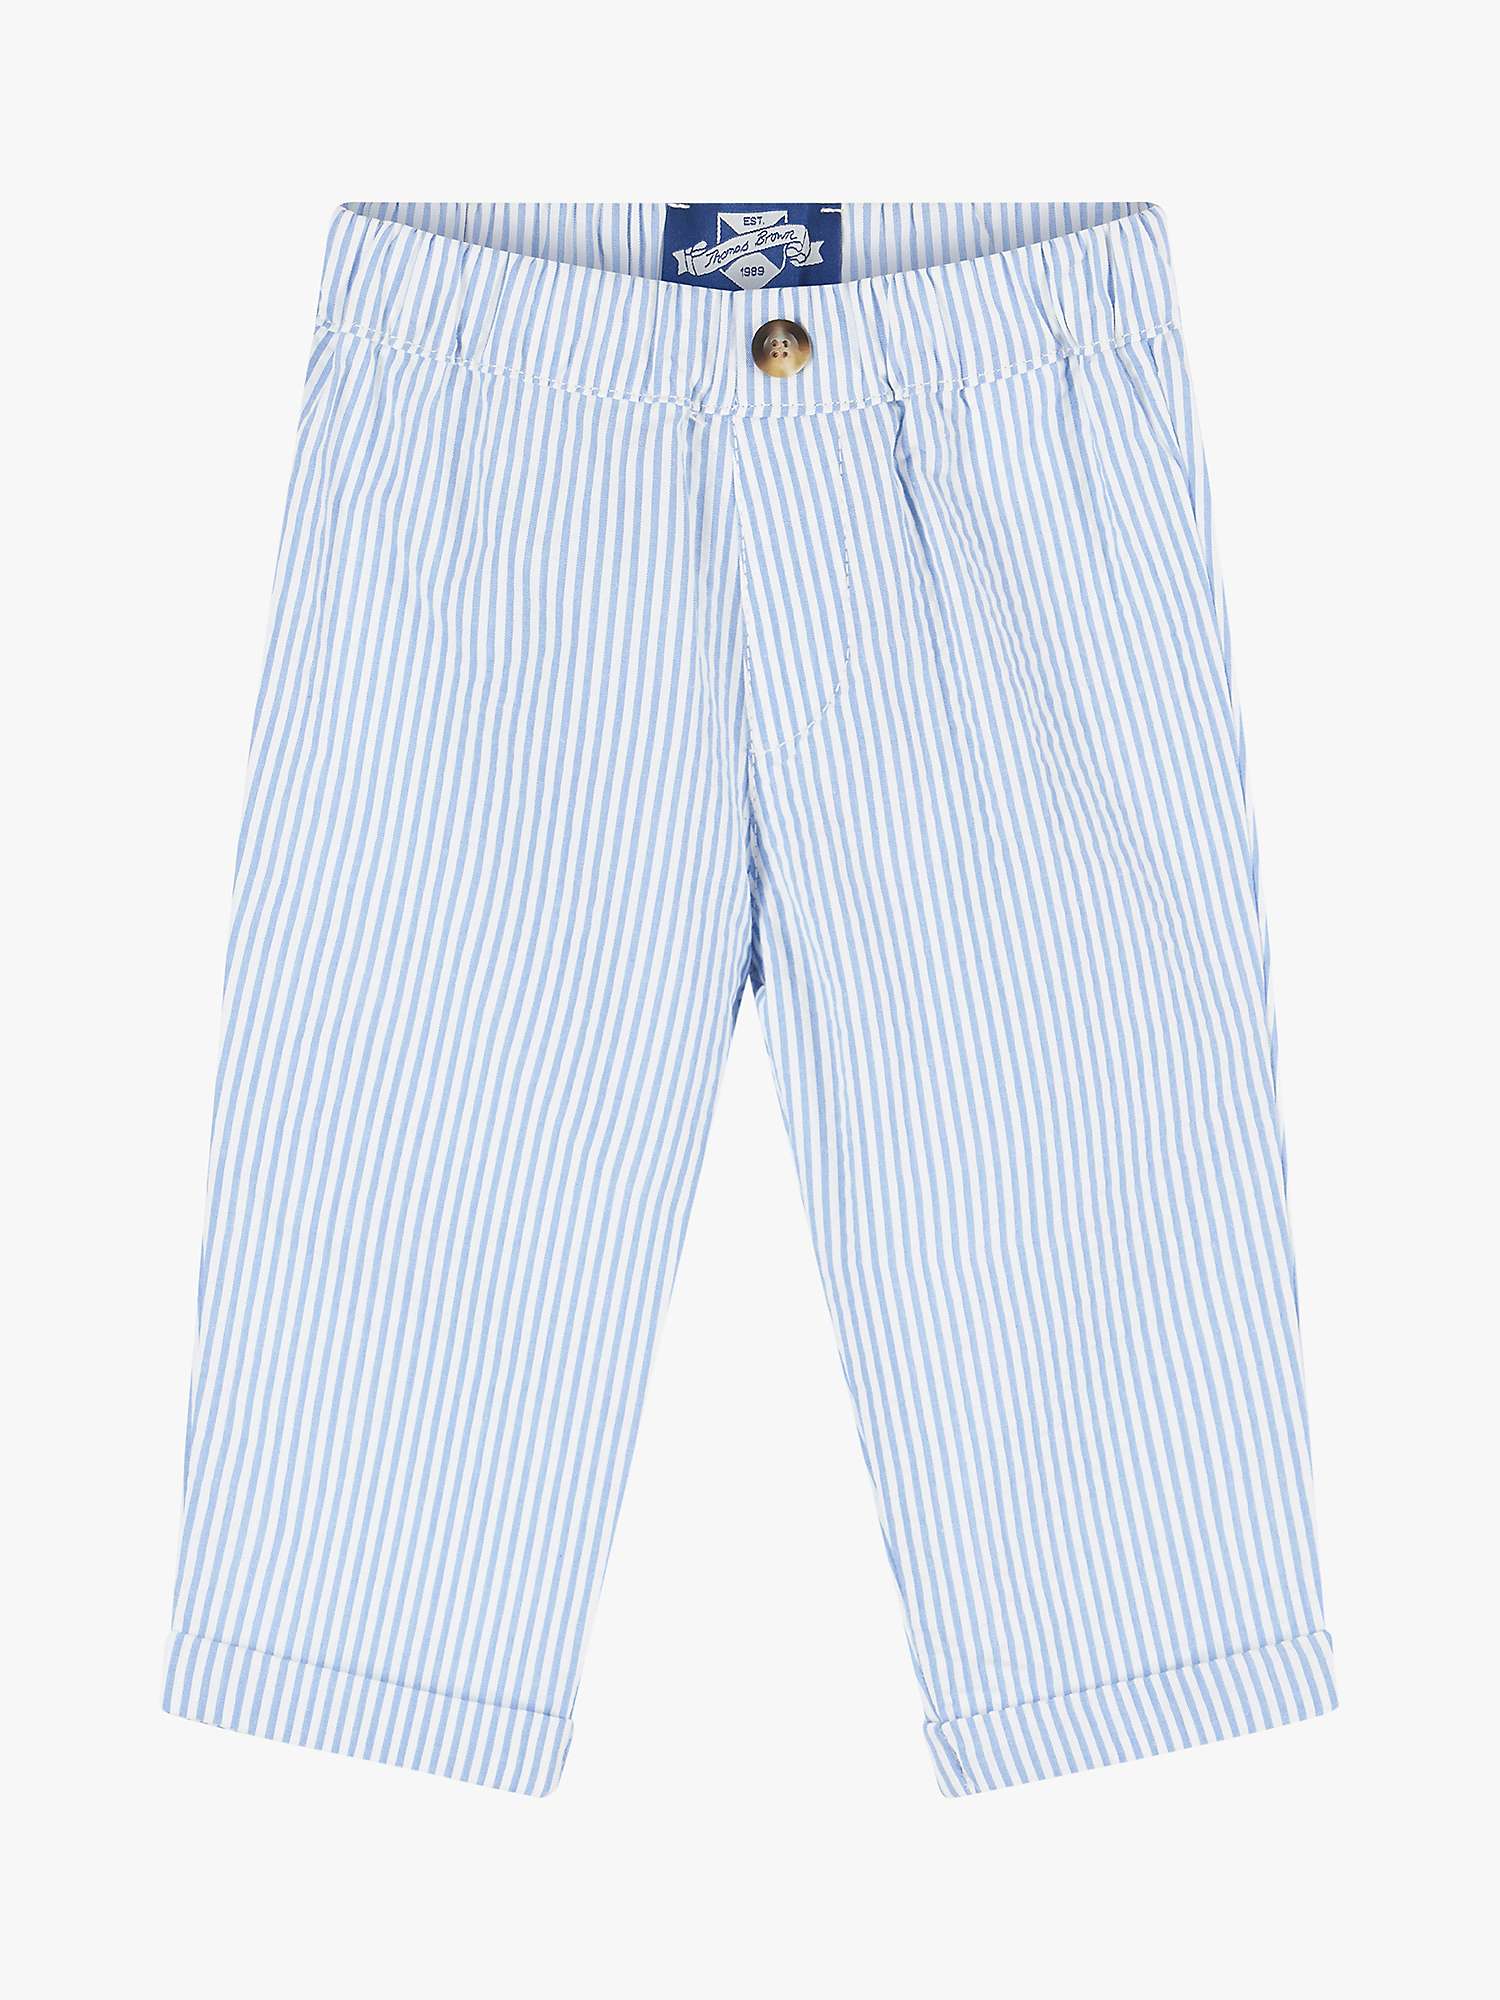 Buy Trotters Baby Orly Cotton Trousers Online at johnlewis.com